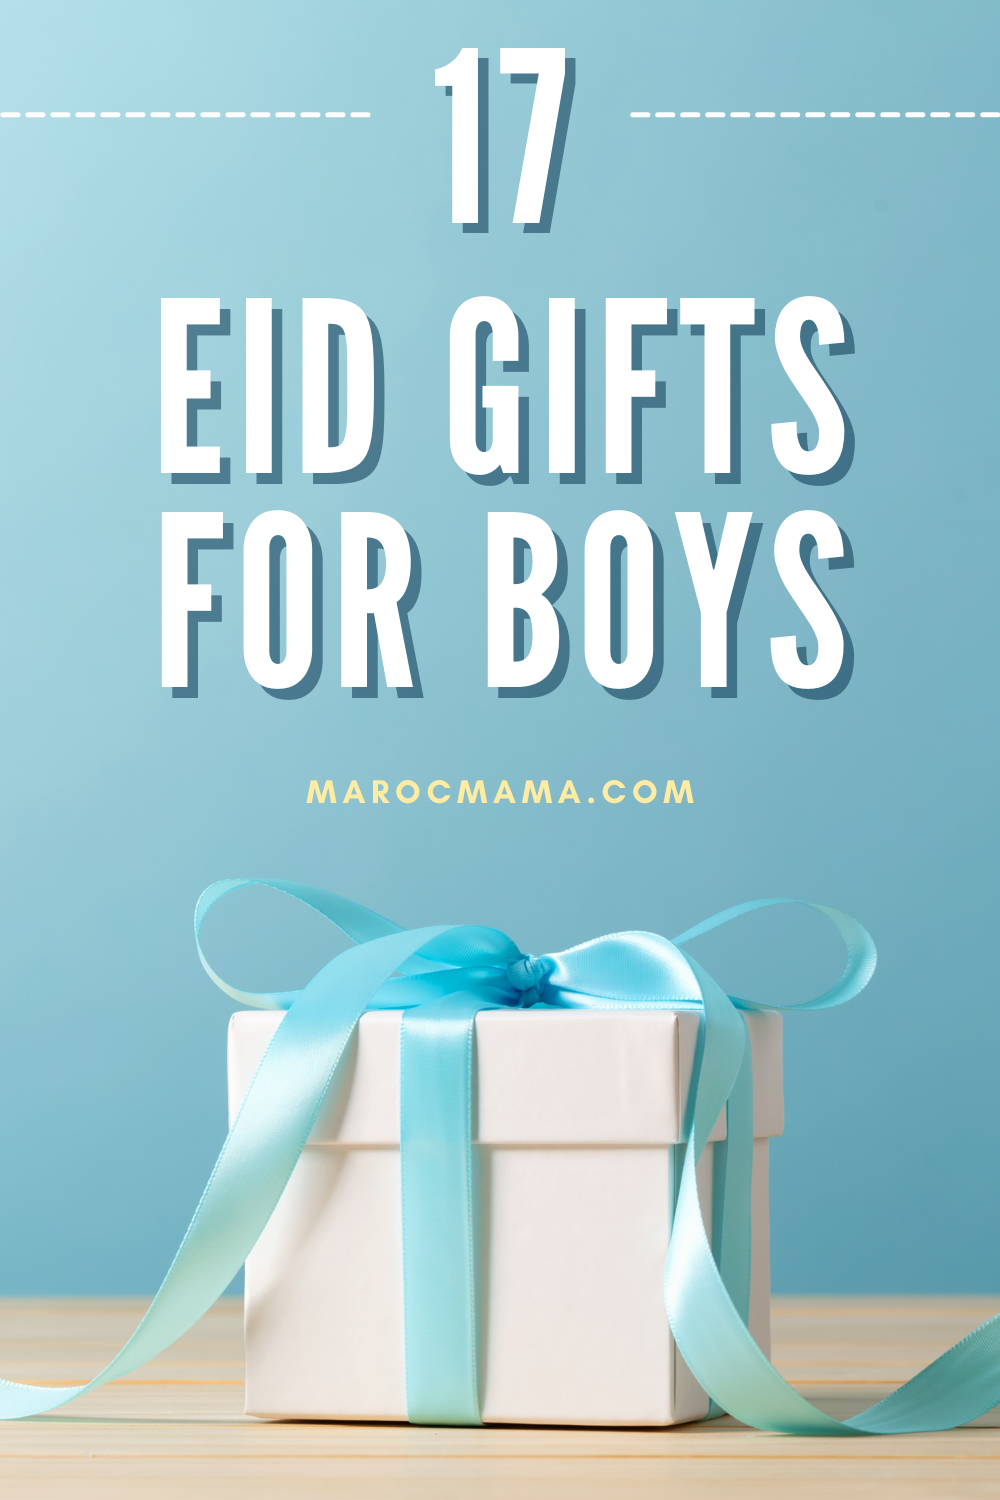 White gift box with light blue ribbon on light blue background with the text 17 Eid Gifts for Boys